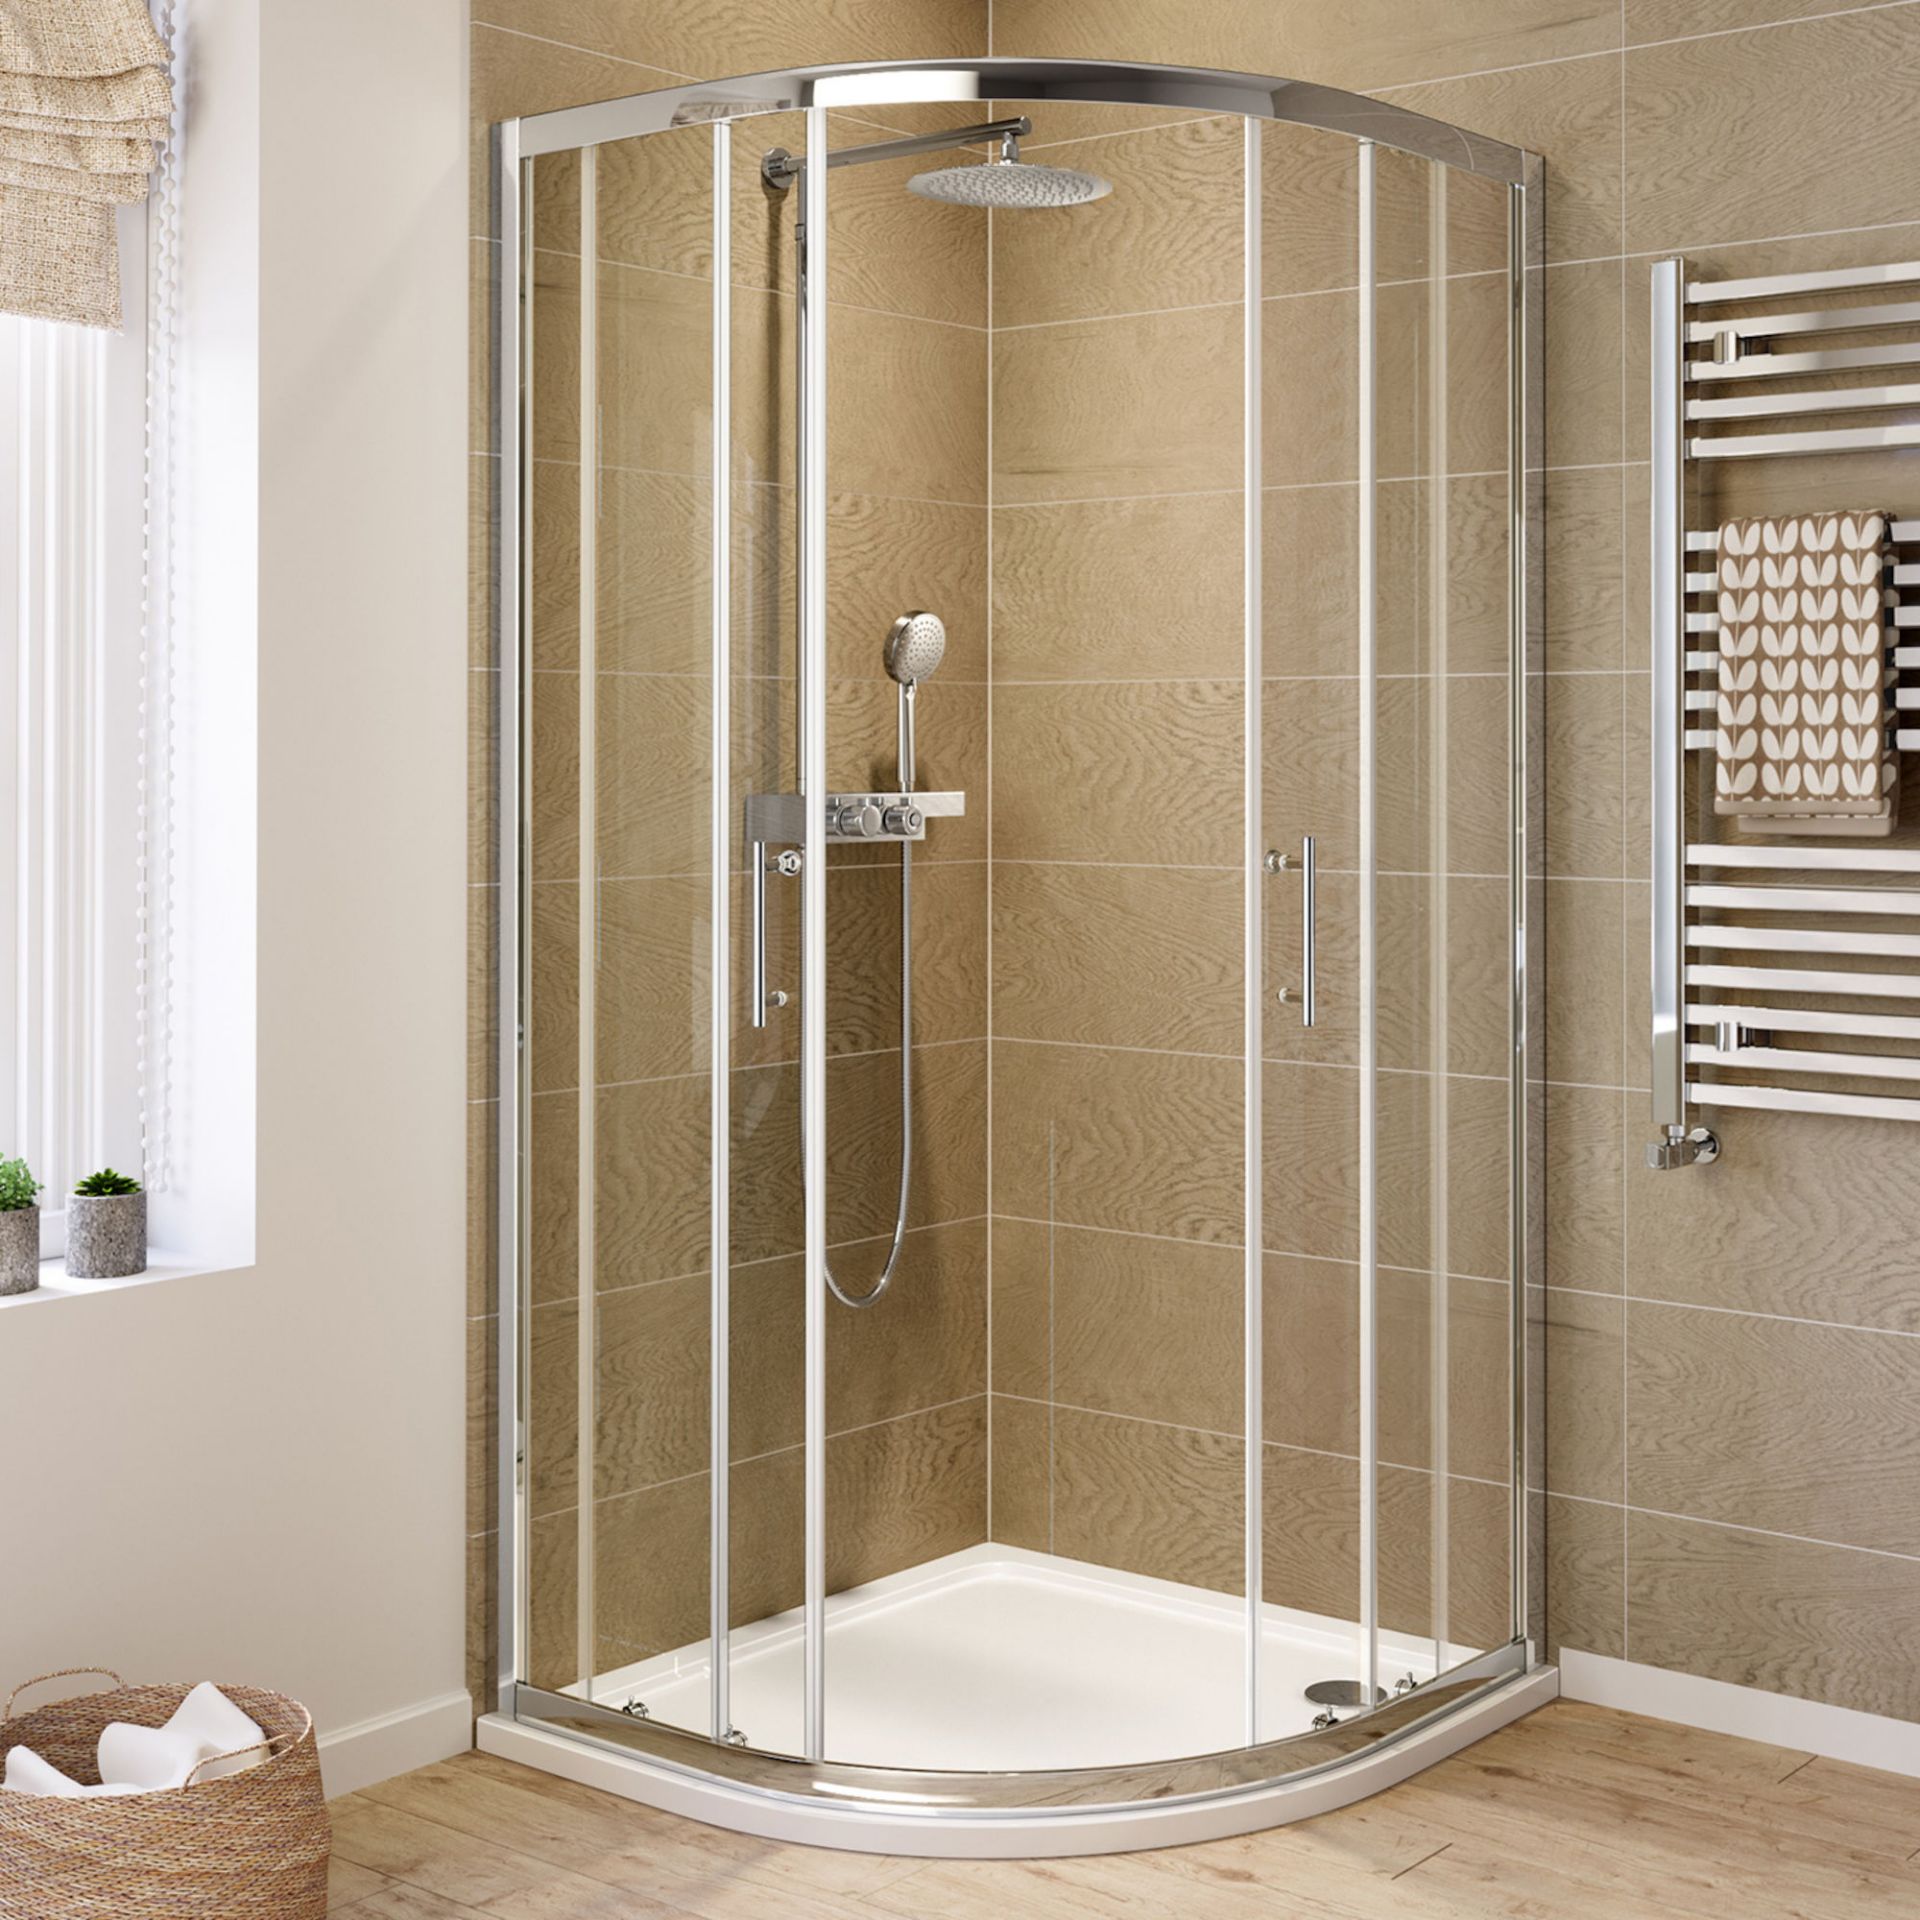 (ND219) 900x900mm - 6mm - Elements Quadrant Shower Enclosure. 6mm Safety Glass Fully waterproof